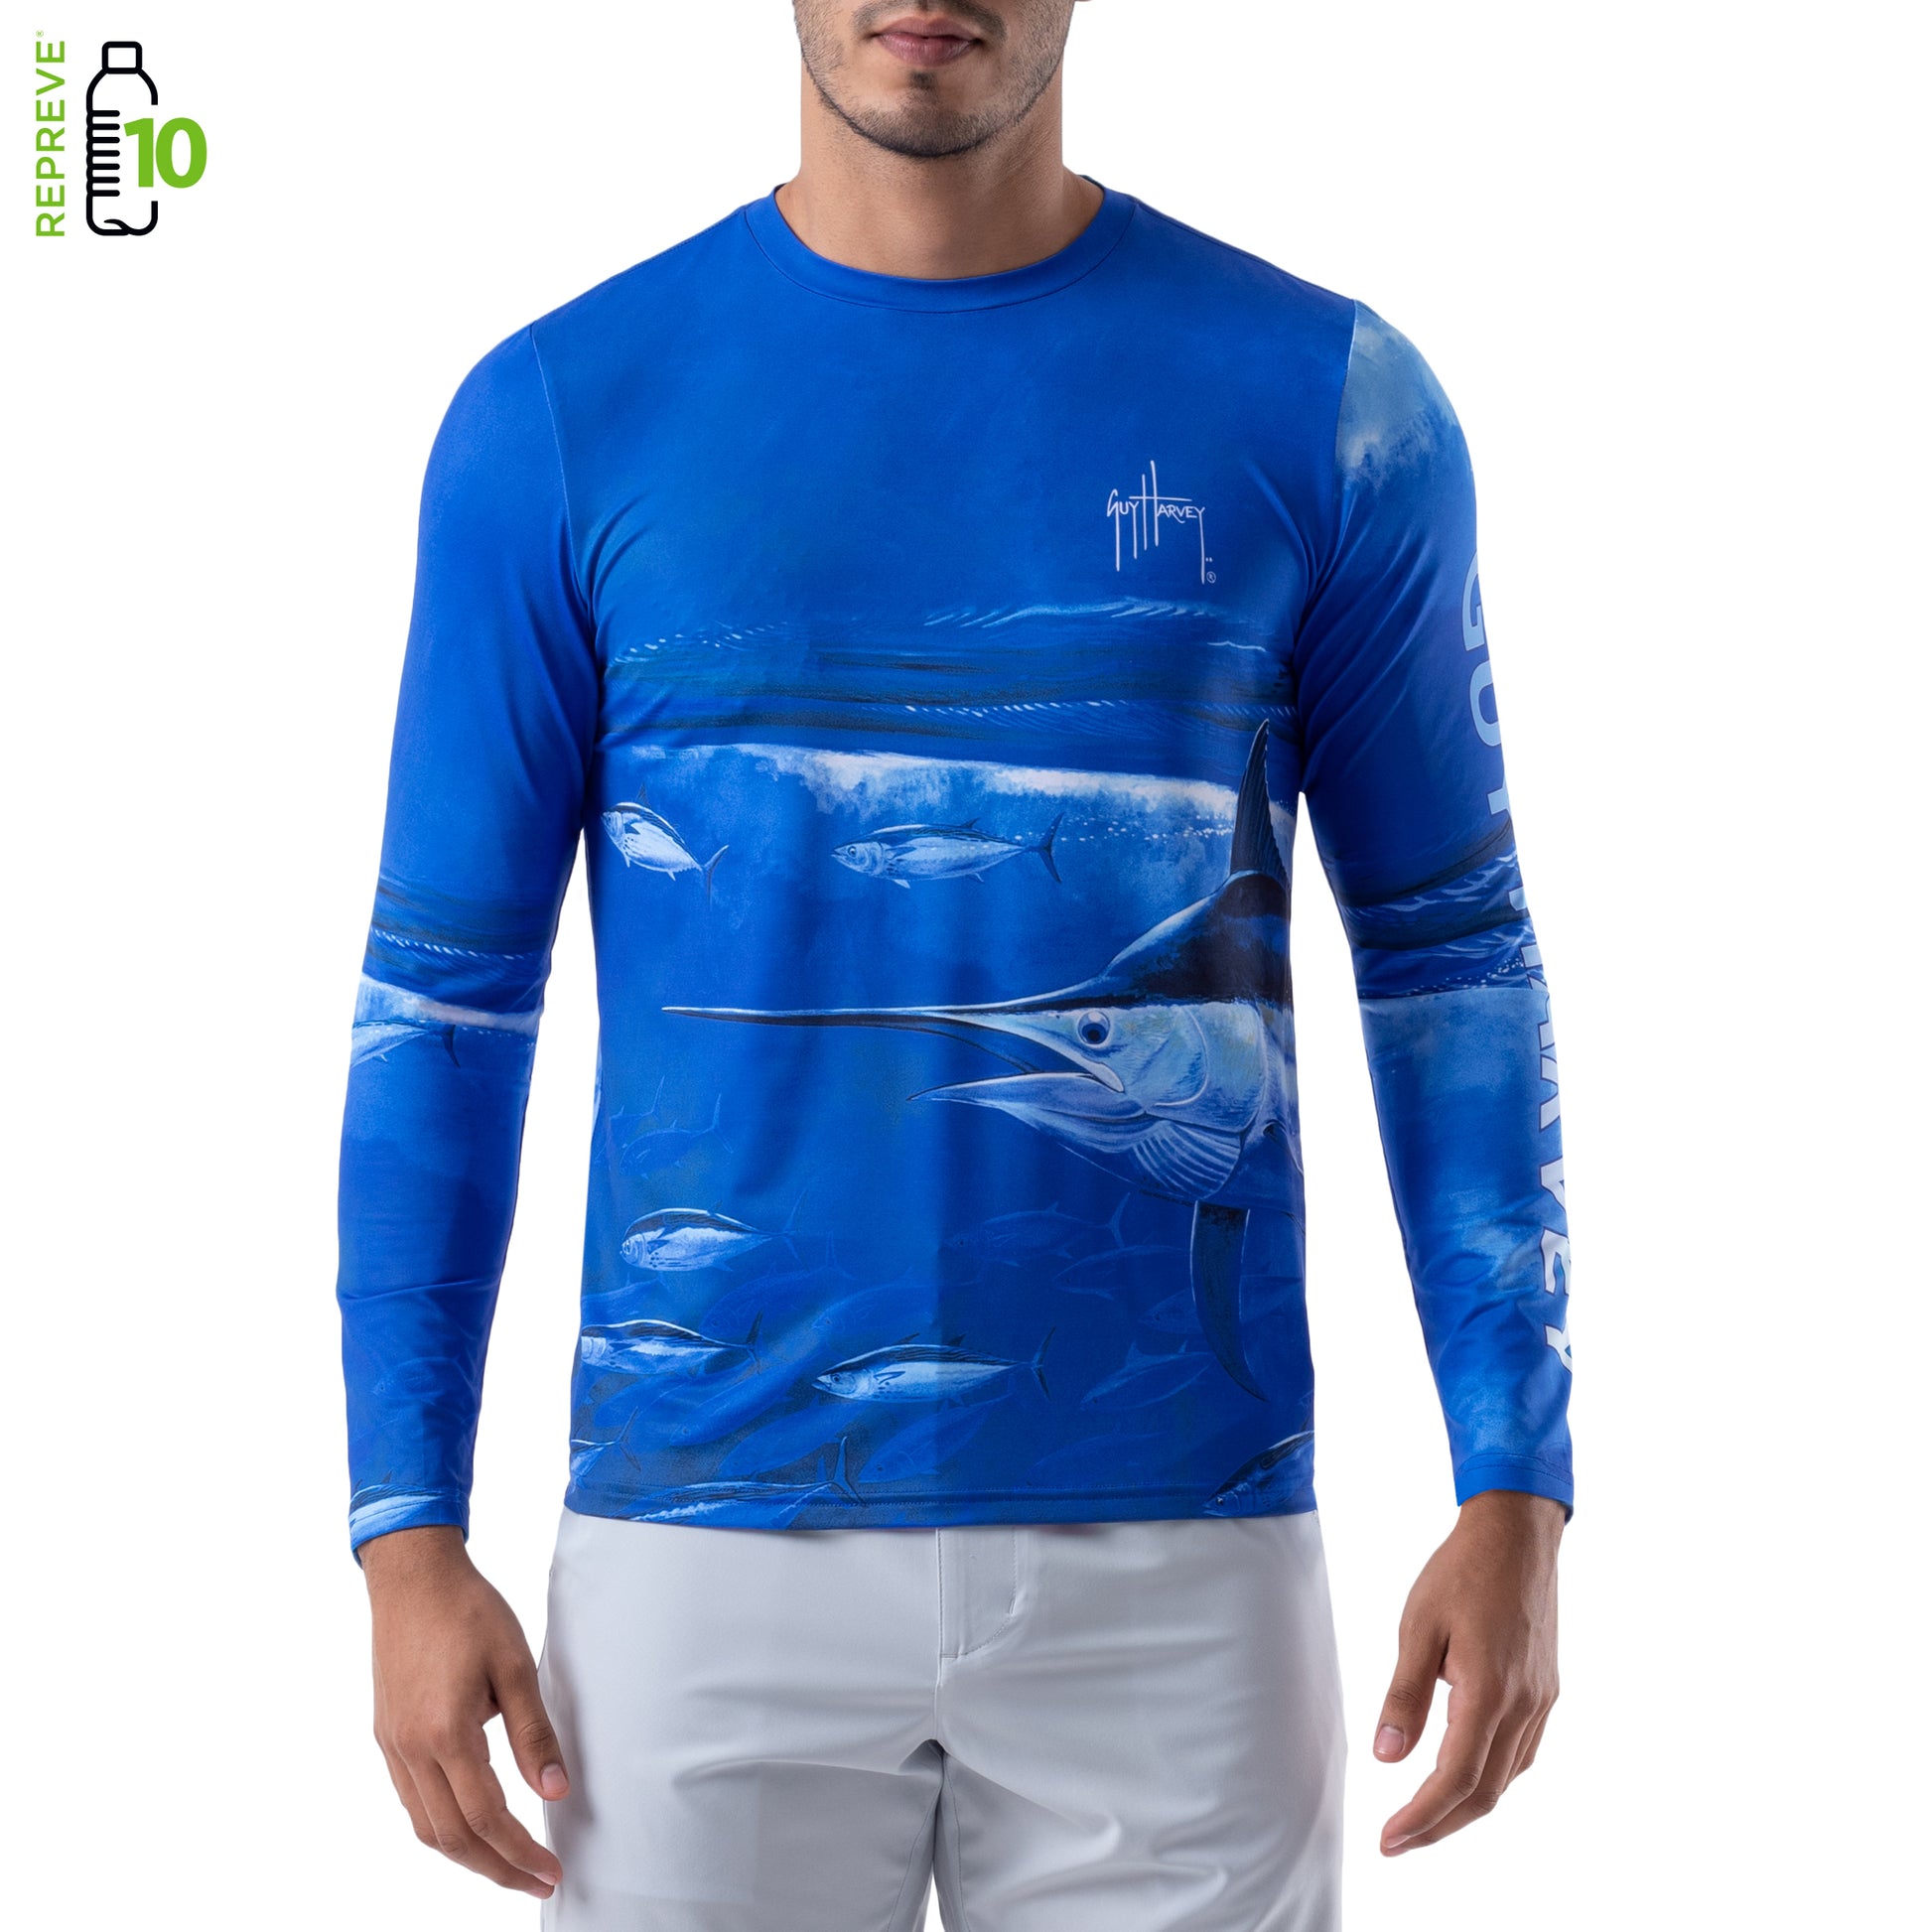 SK Marlin on Chest Long Sleeve UPF 50+ Dry-Fit Shirt – Saltwater Born